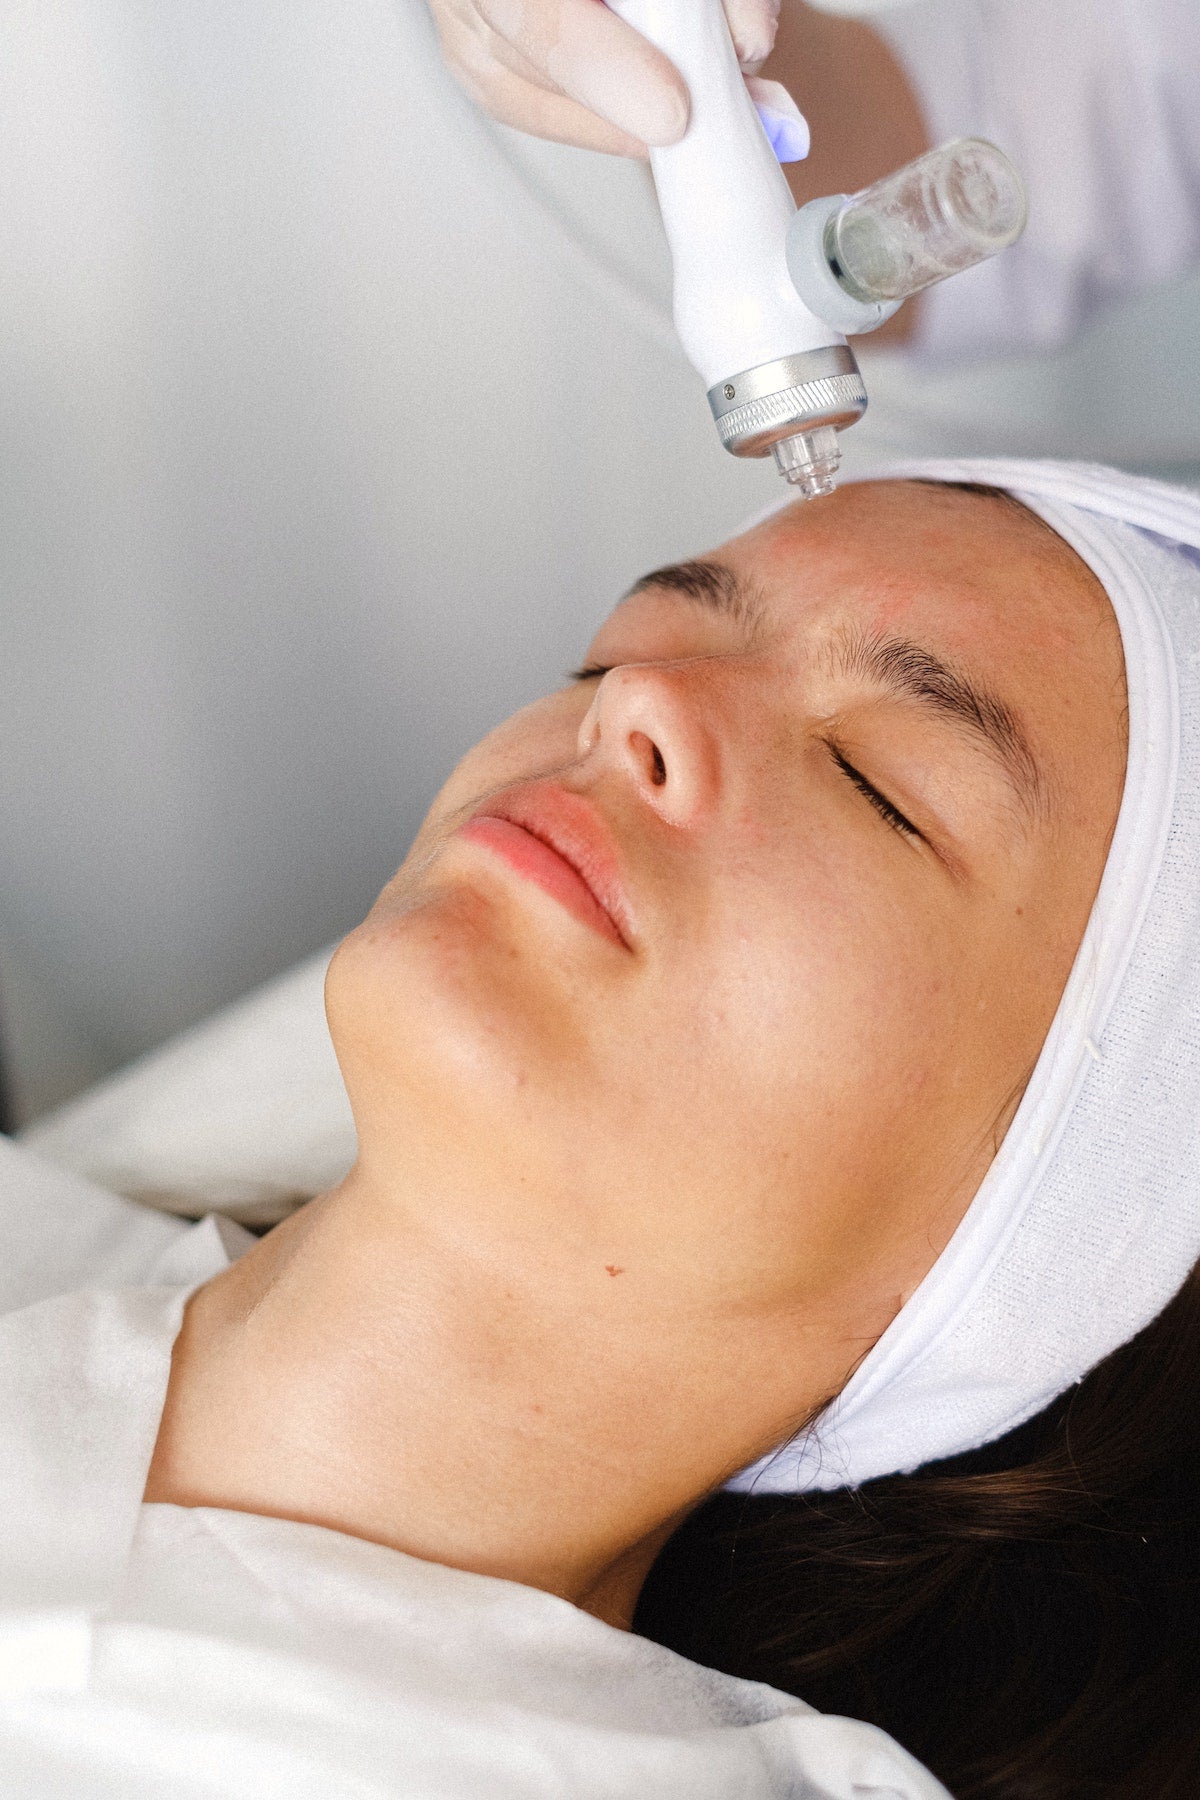 Does Low Level Laser Therapy Really Help Hair Loss?